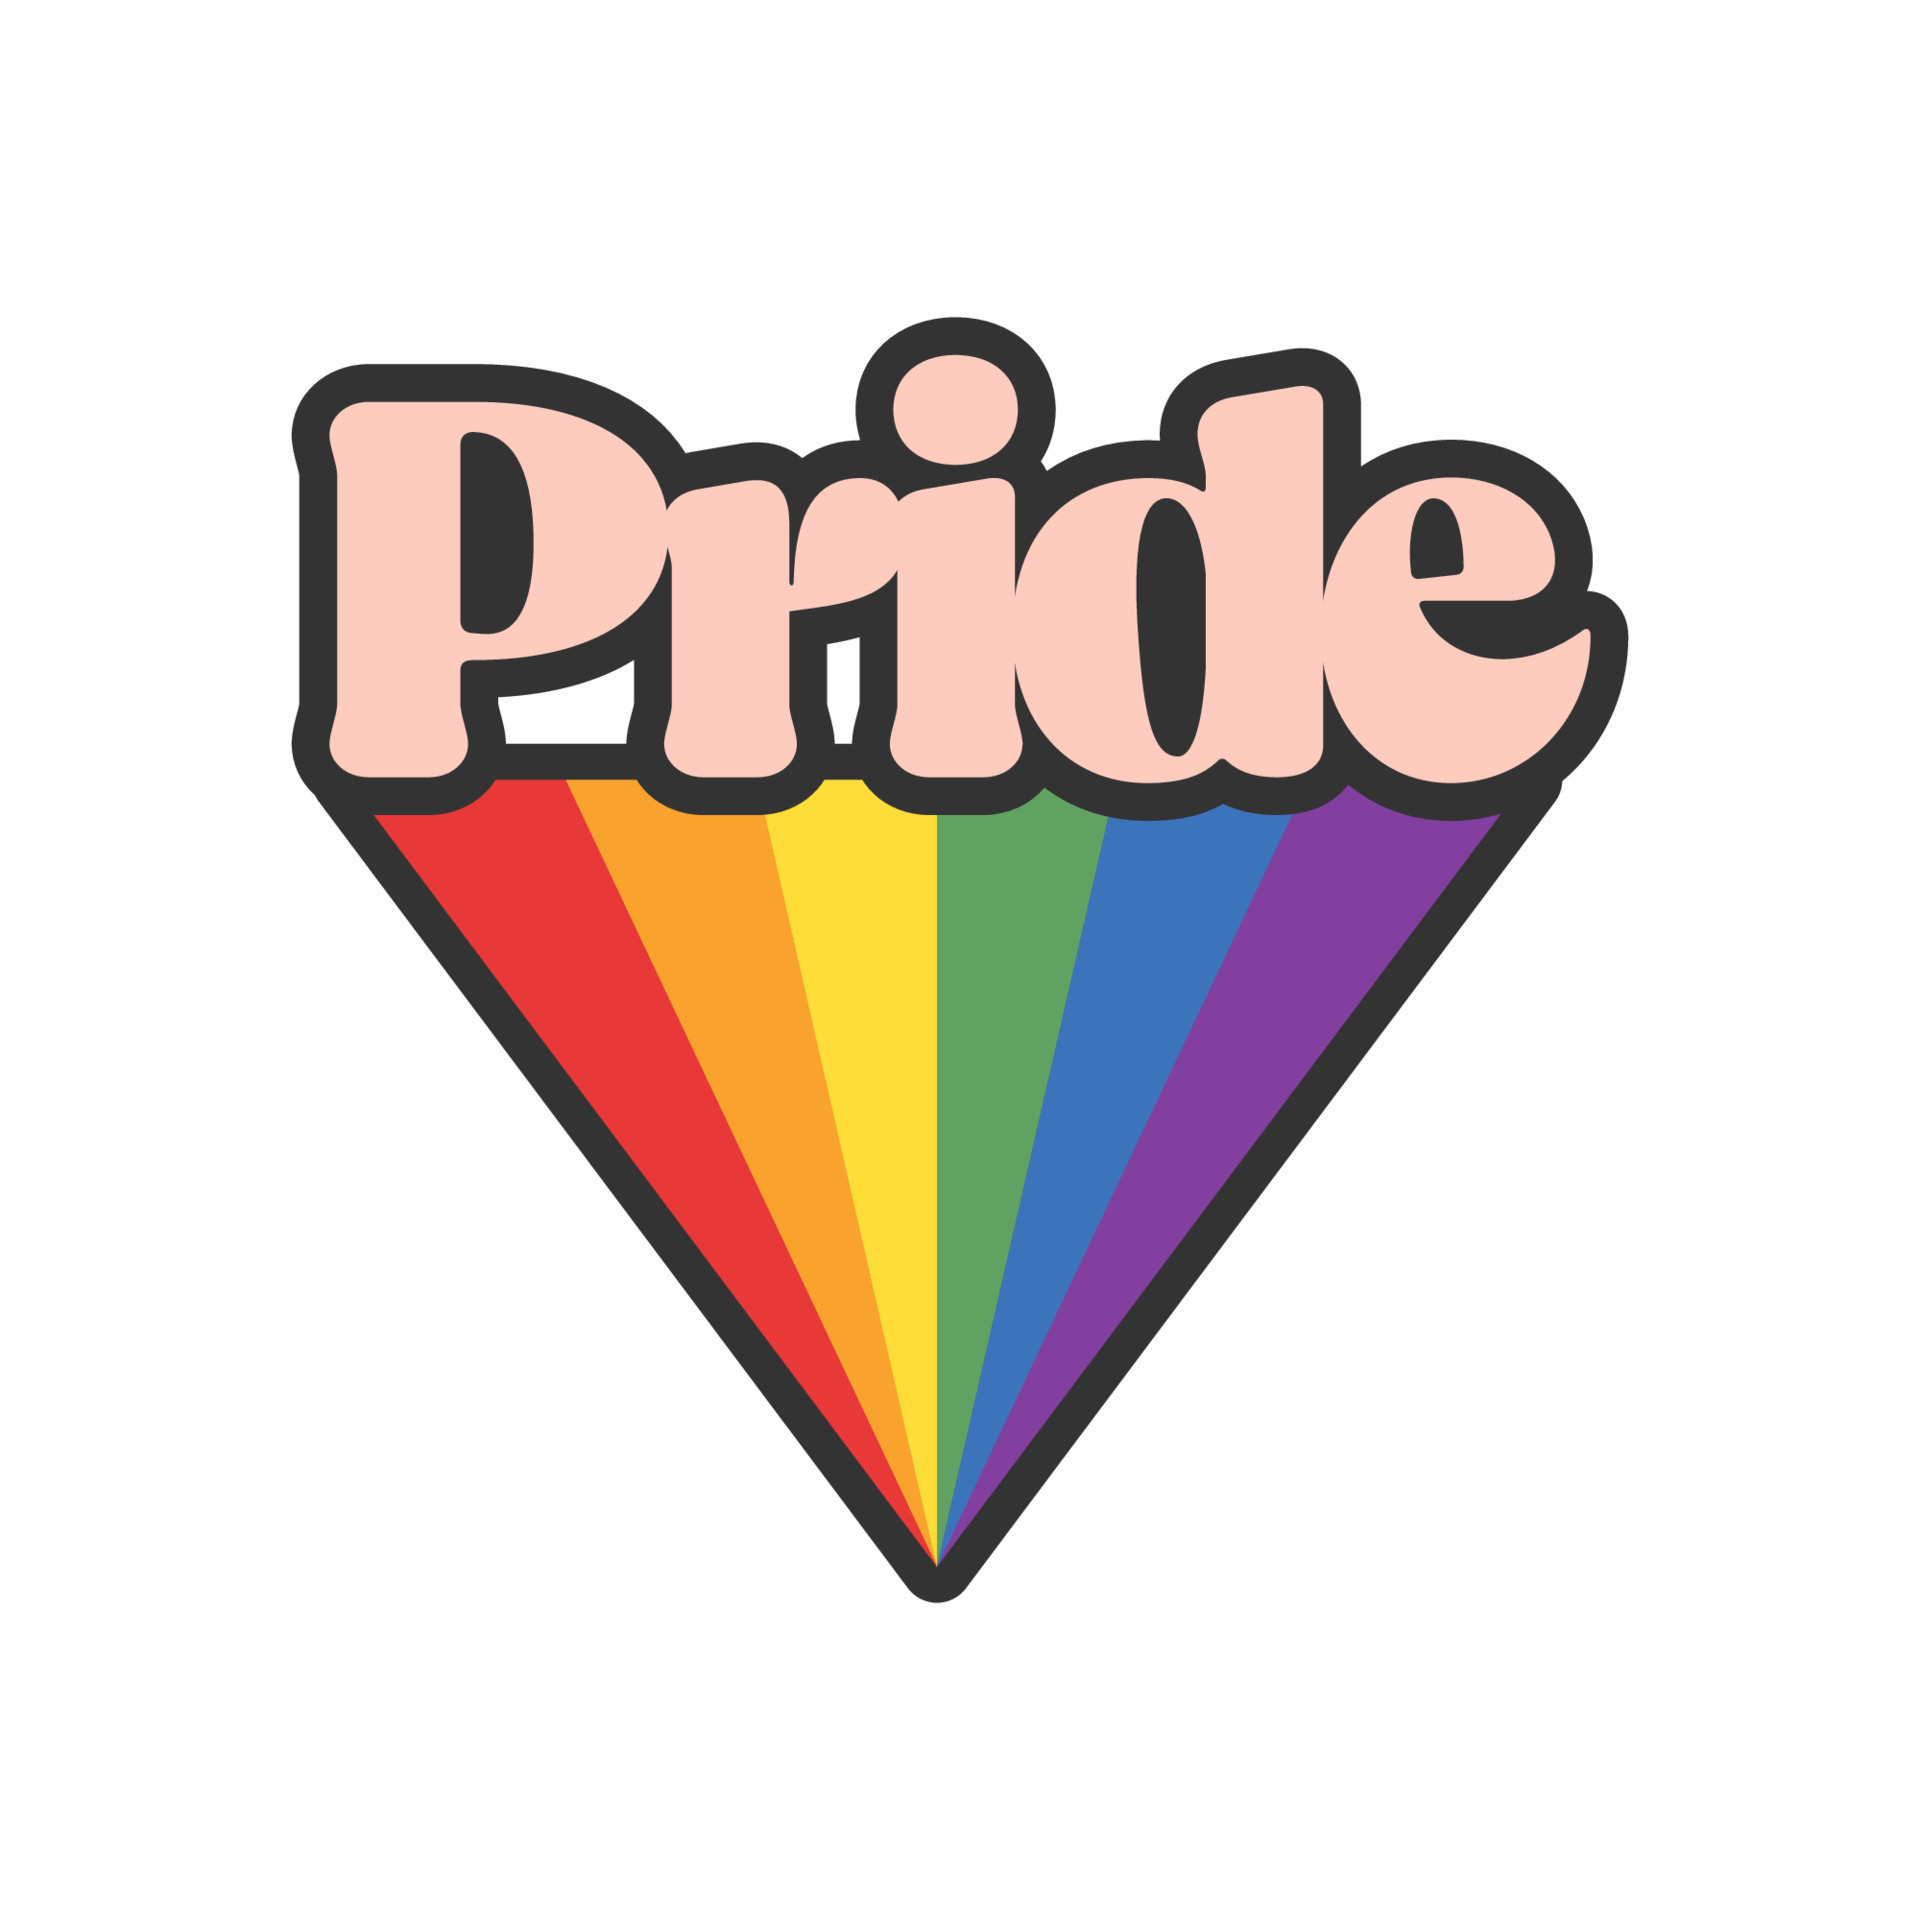 Pride Text With Rainbow Flag Badge Lgbt Symbol Gay Lesbian Bisexual Trans Queer Love